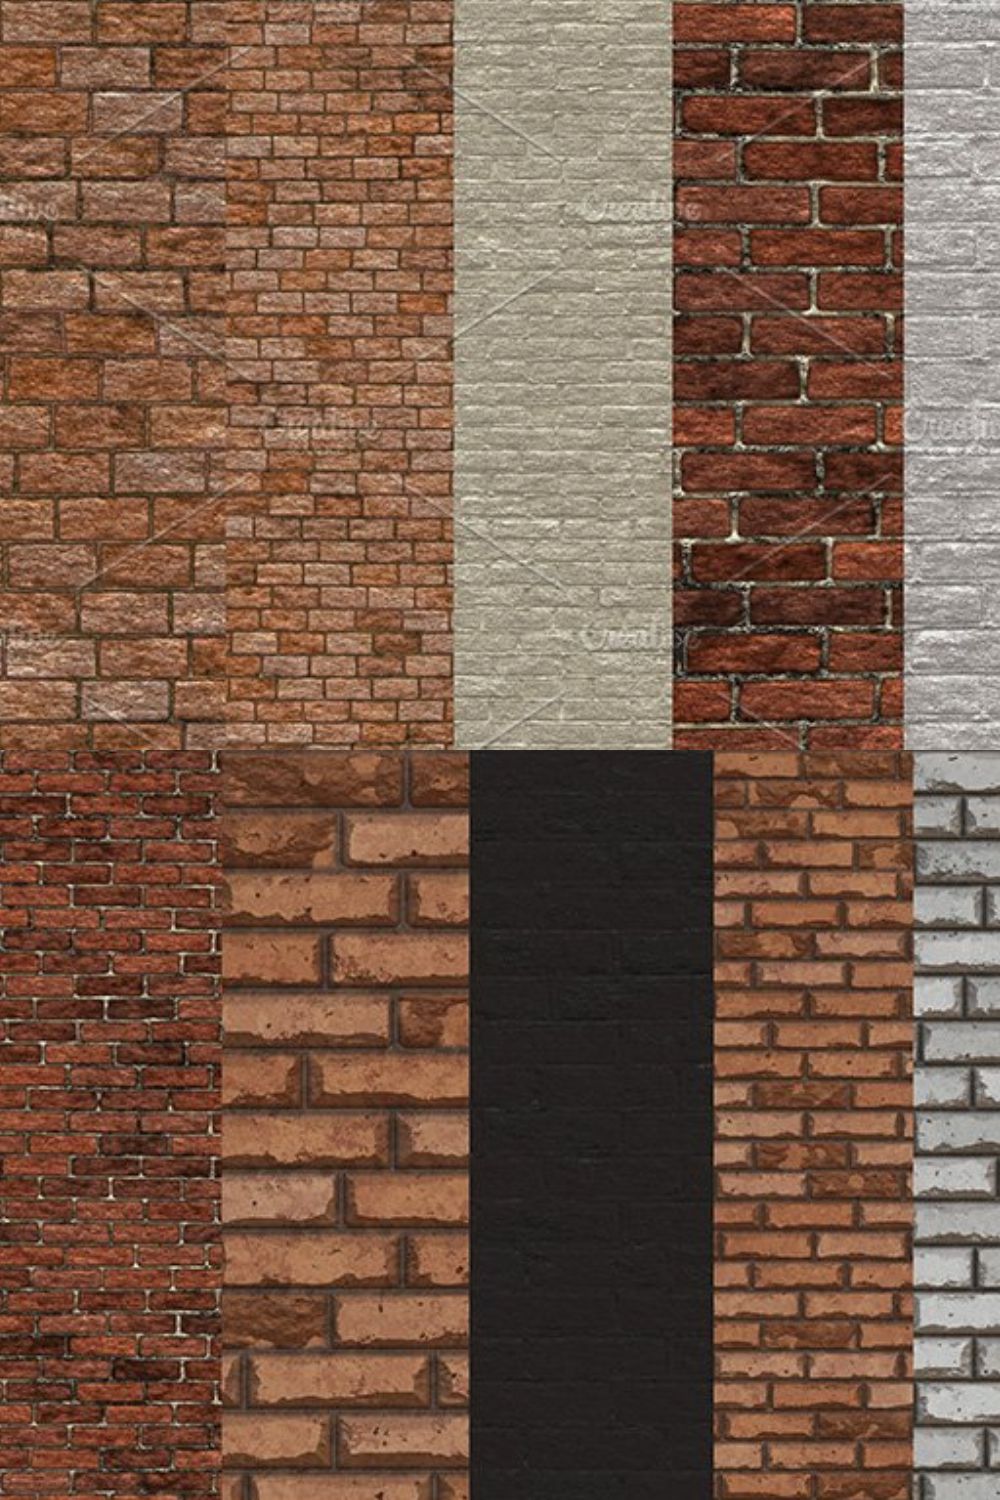 Brick wall textures pinterest preview image.